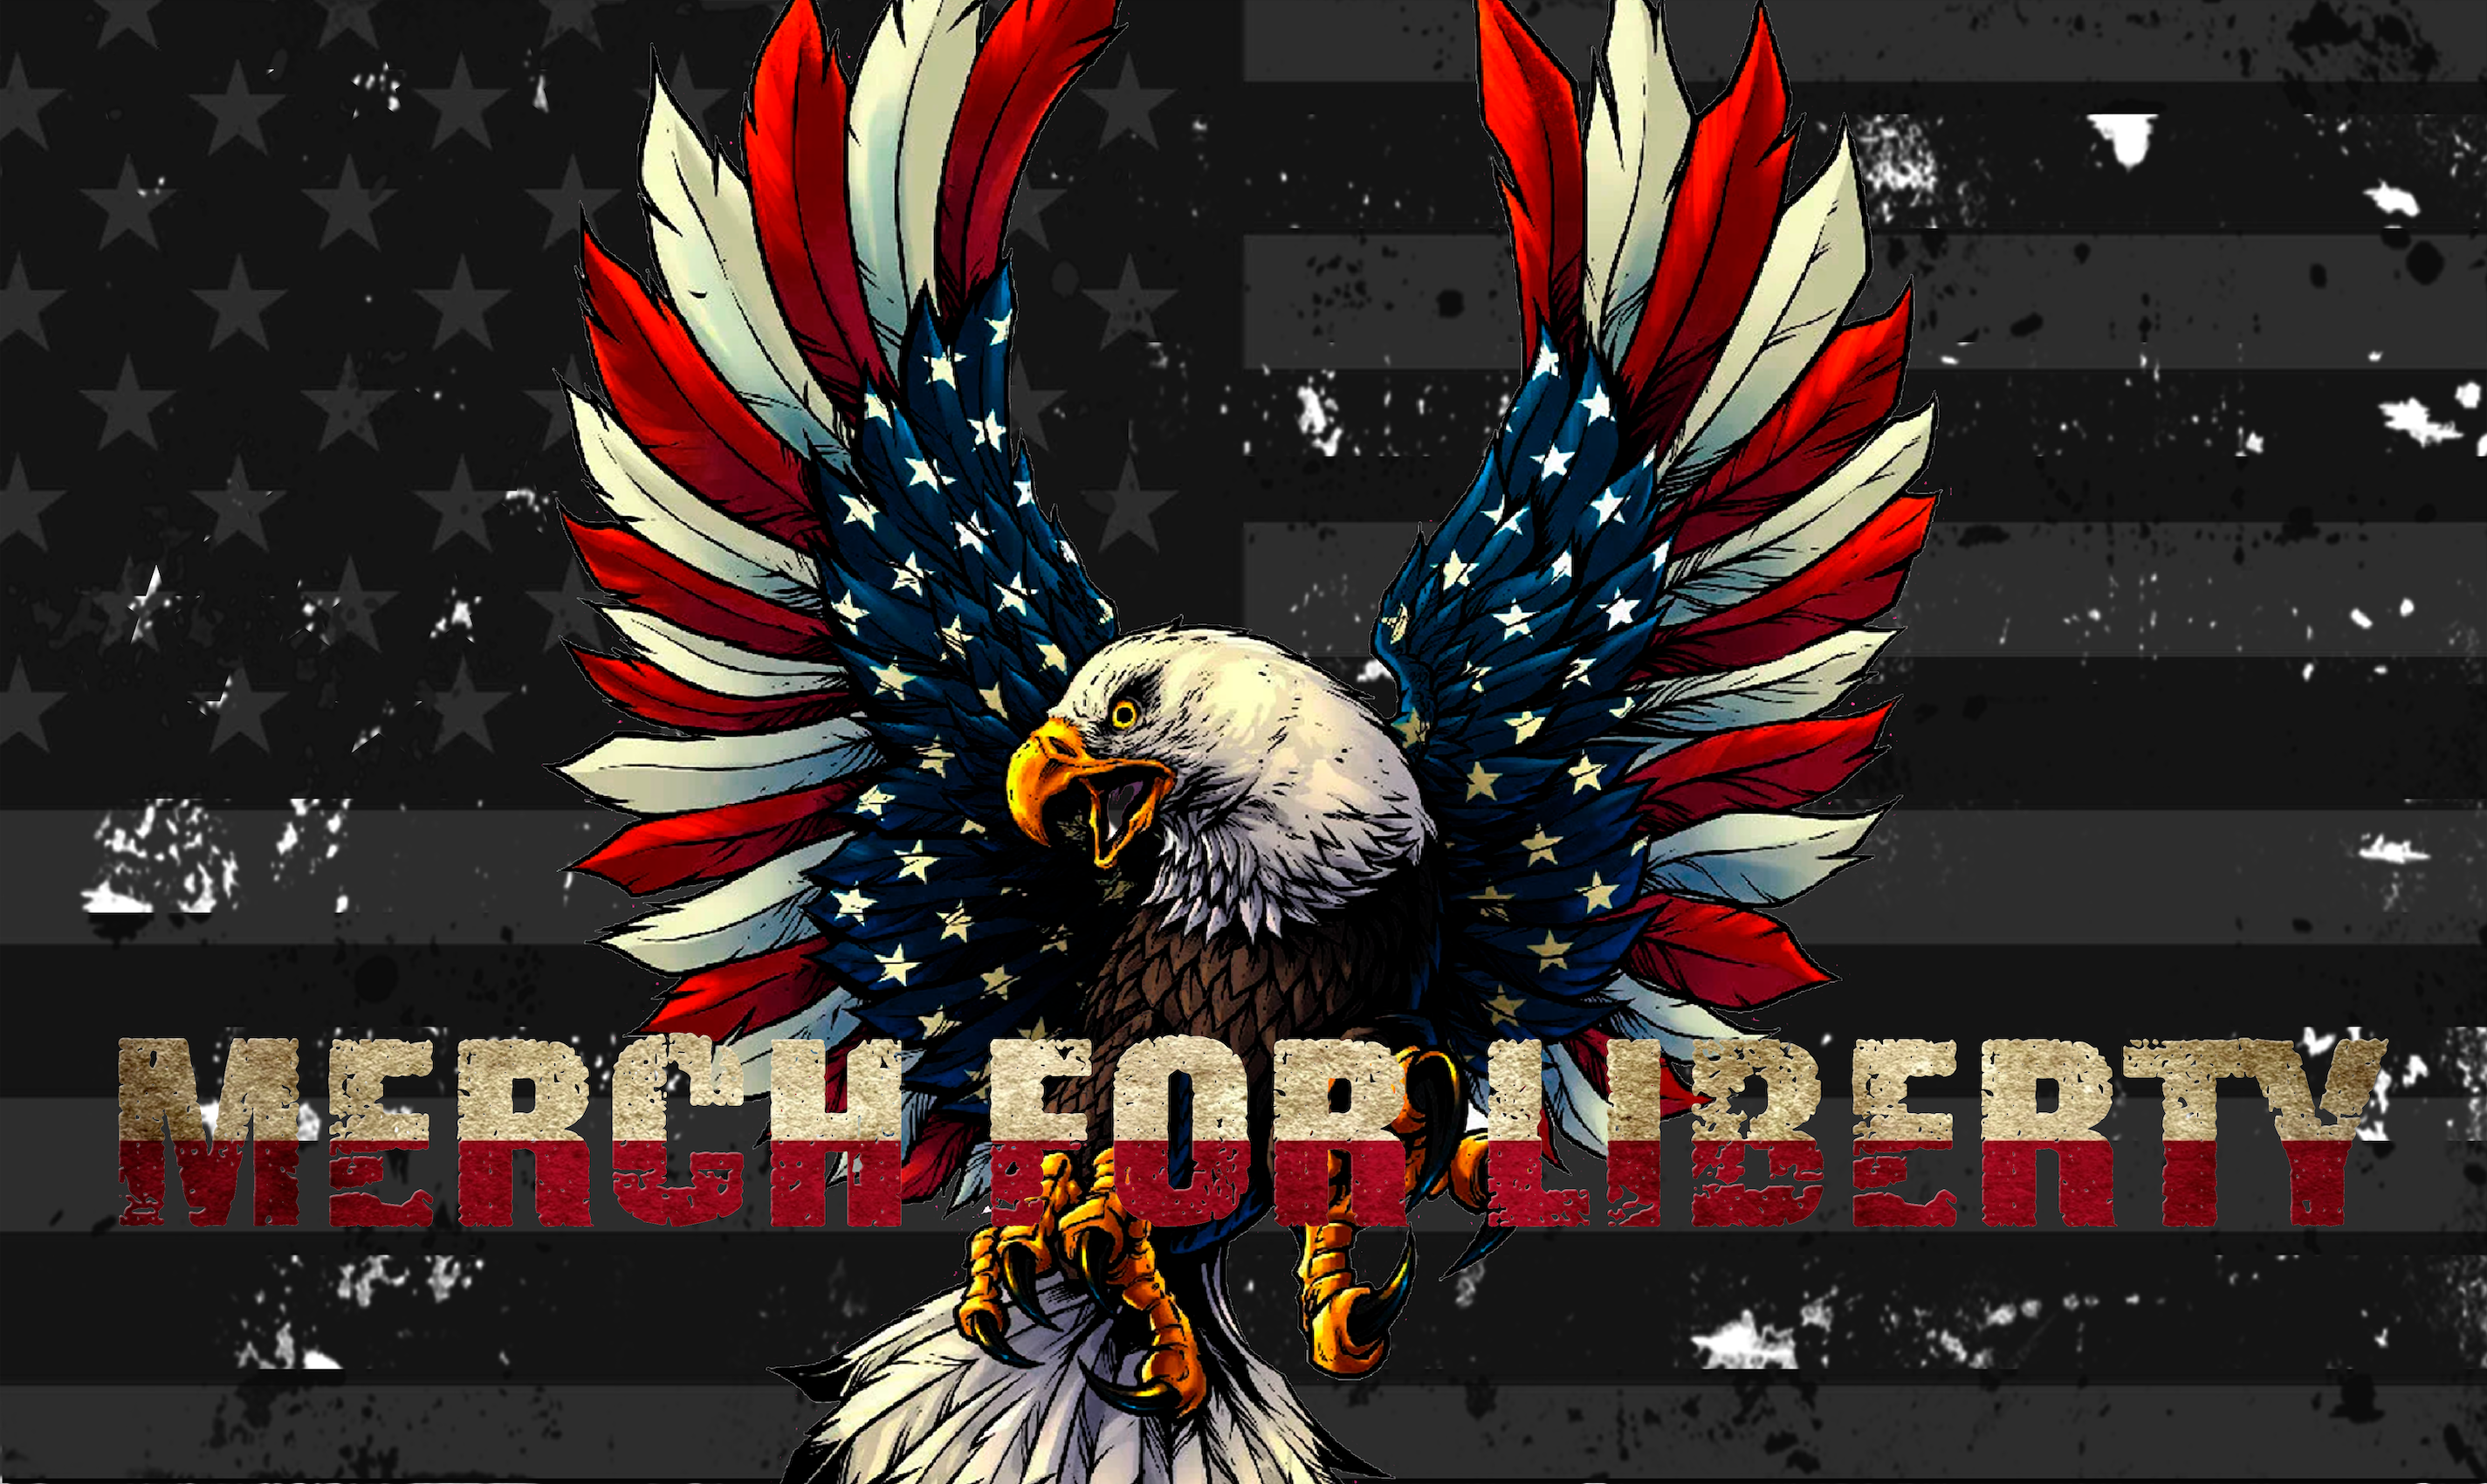 A bold eagle and additional text displaying the name of the brand: Merch for Liberty